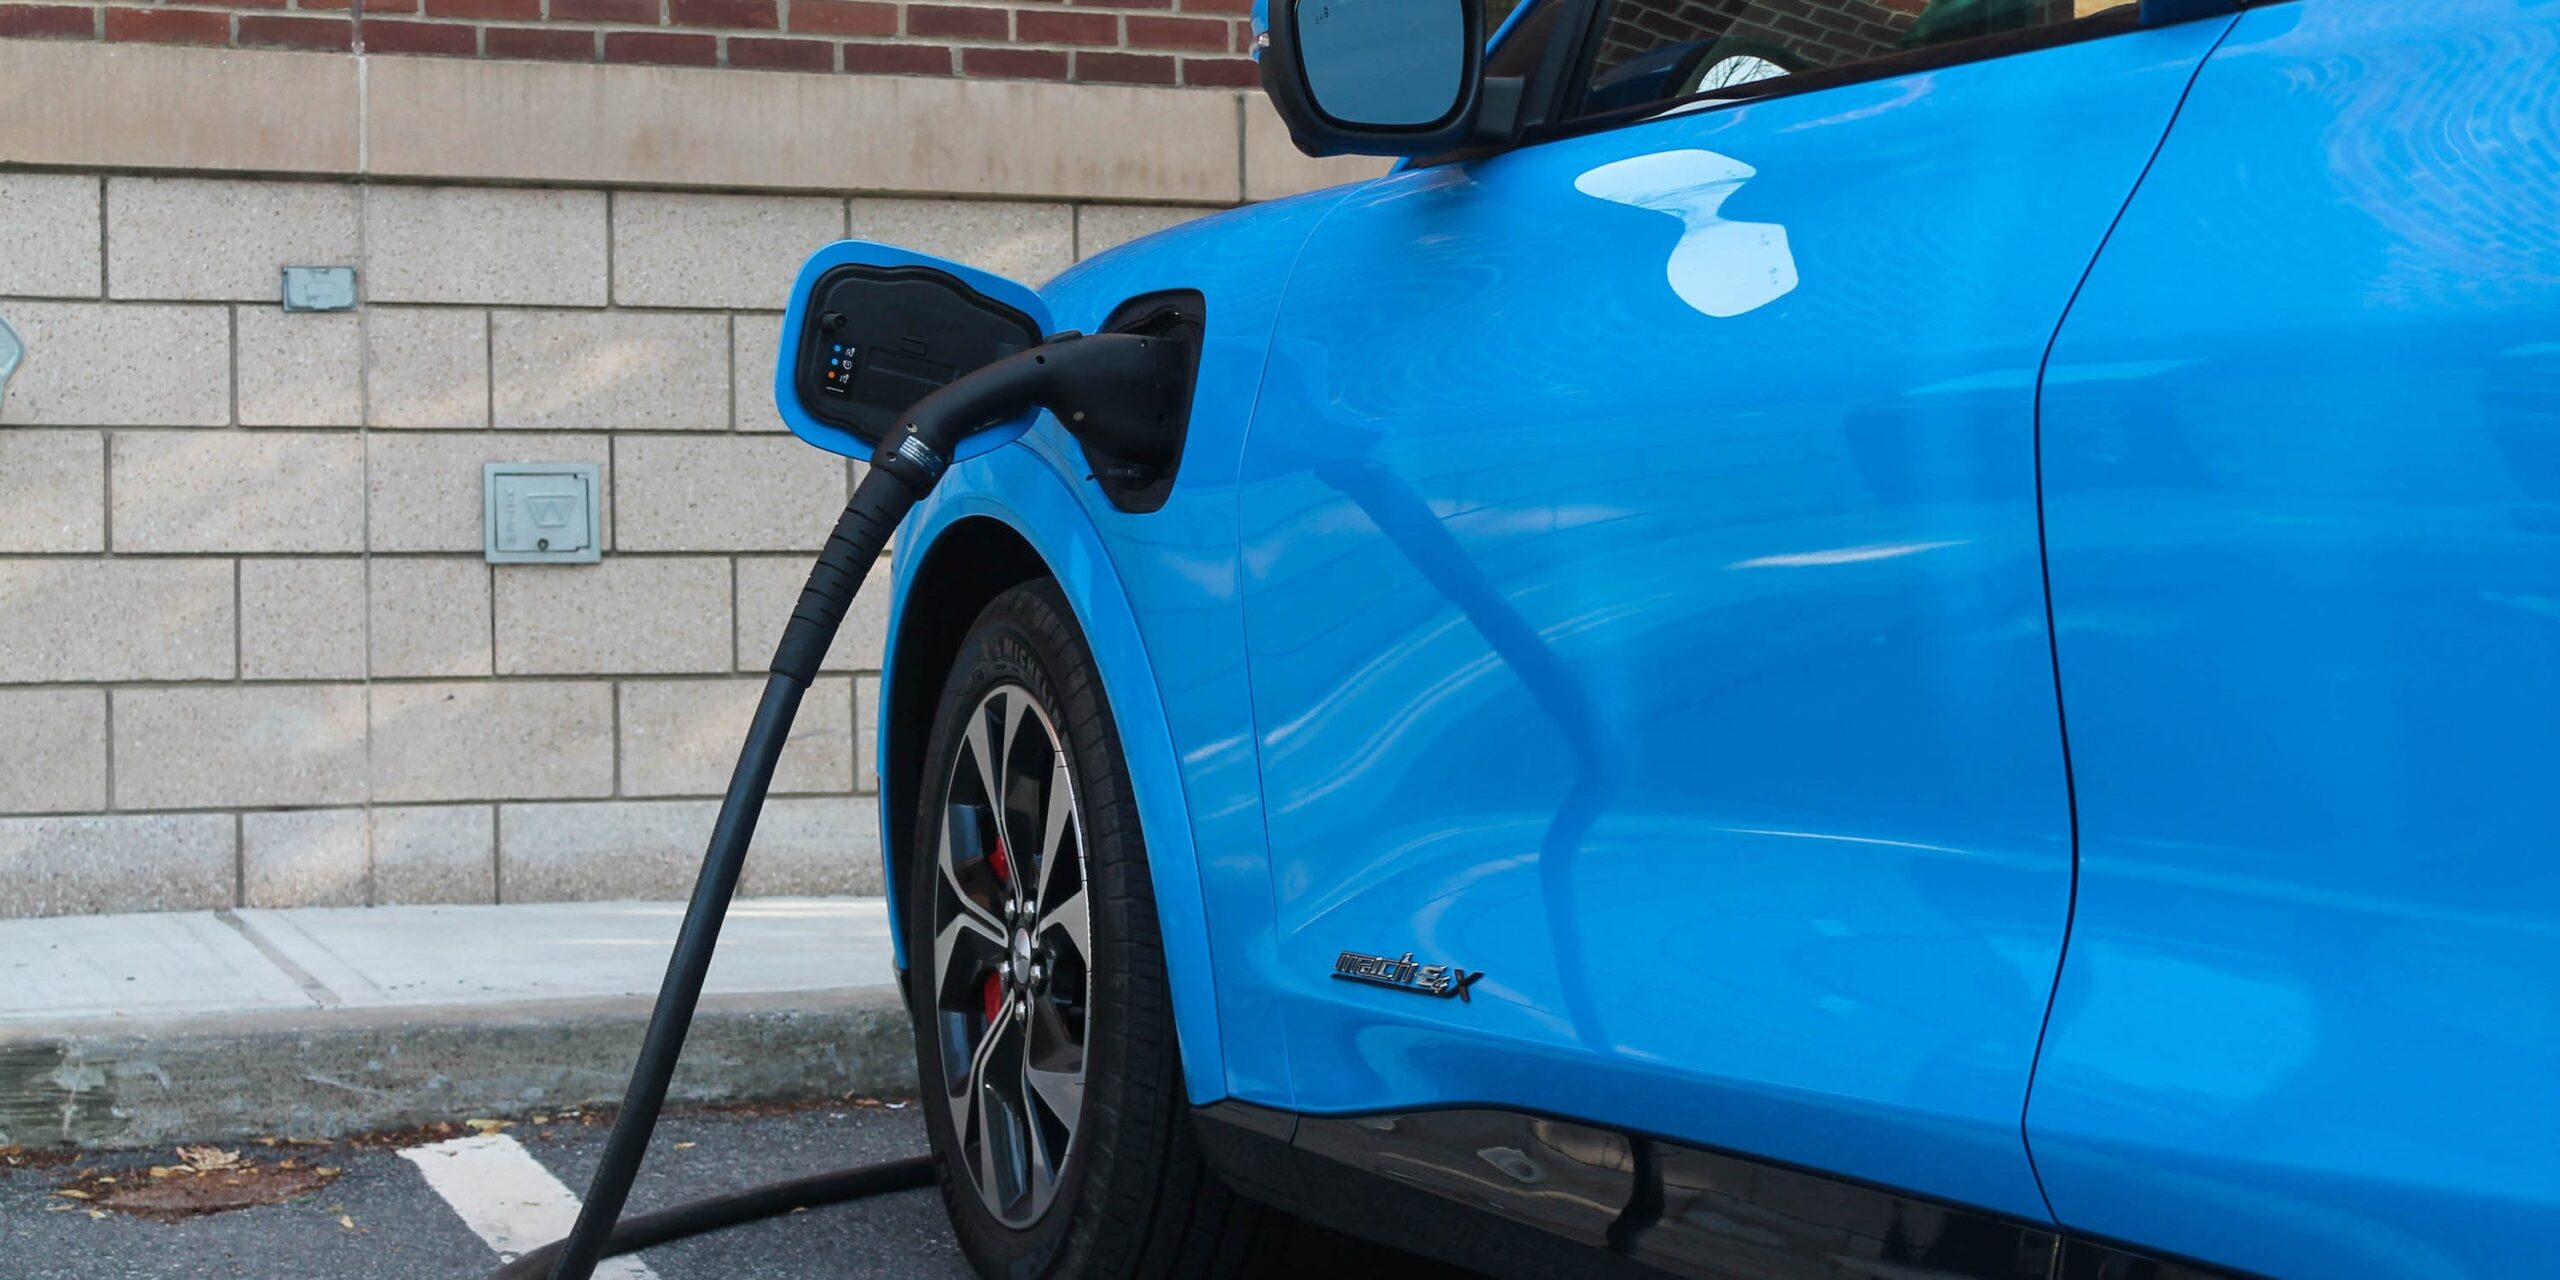 The best ways to find charging stations for your electric vehicle